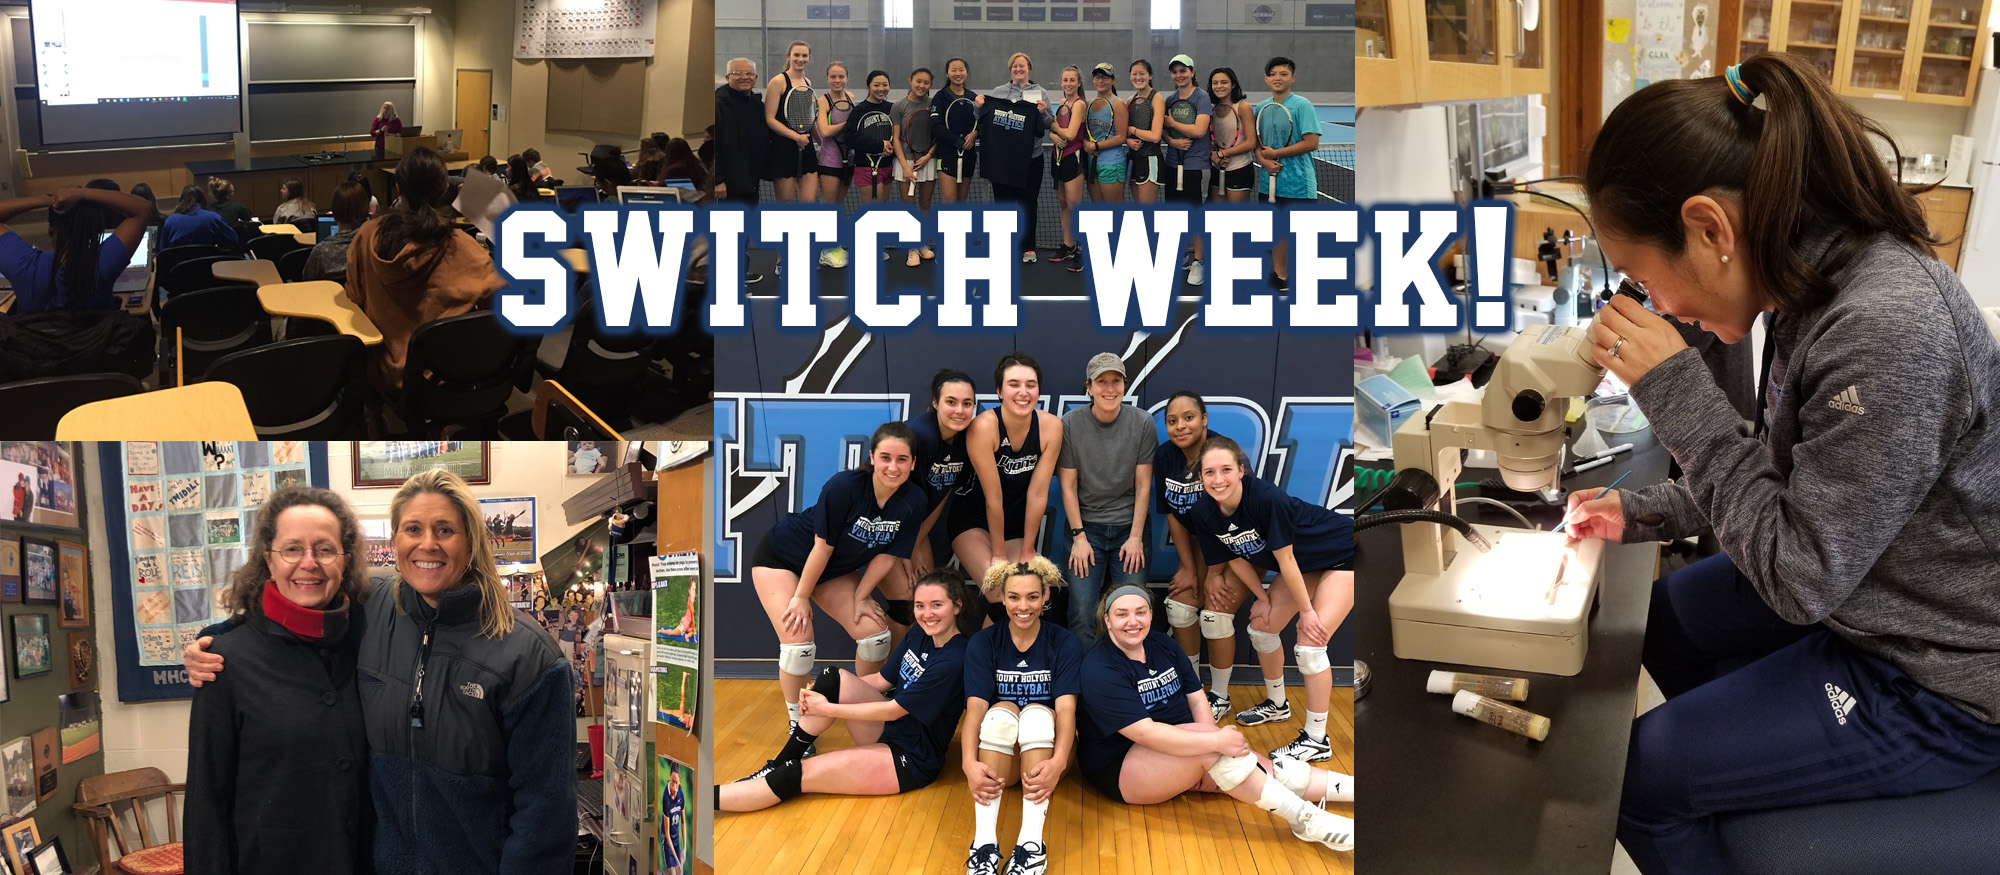 Switch Week graphic showing the coaches and faculty that experienced one another's practices and classes throughout the week of April 1-7.